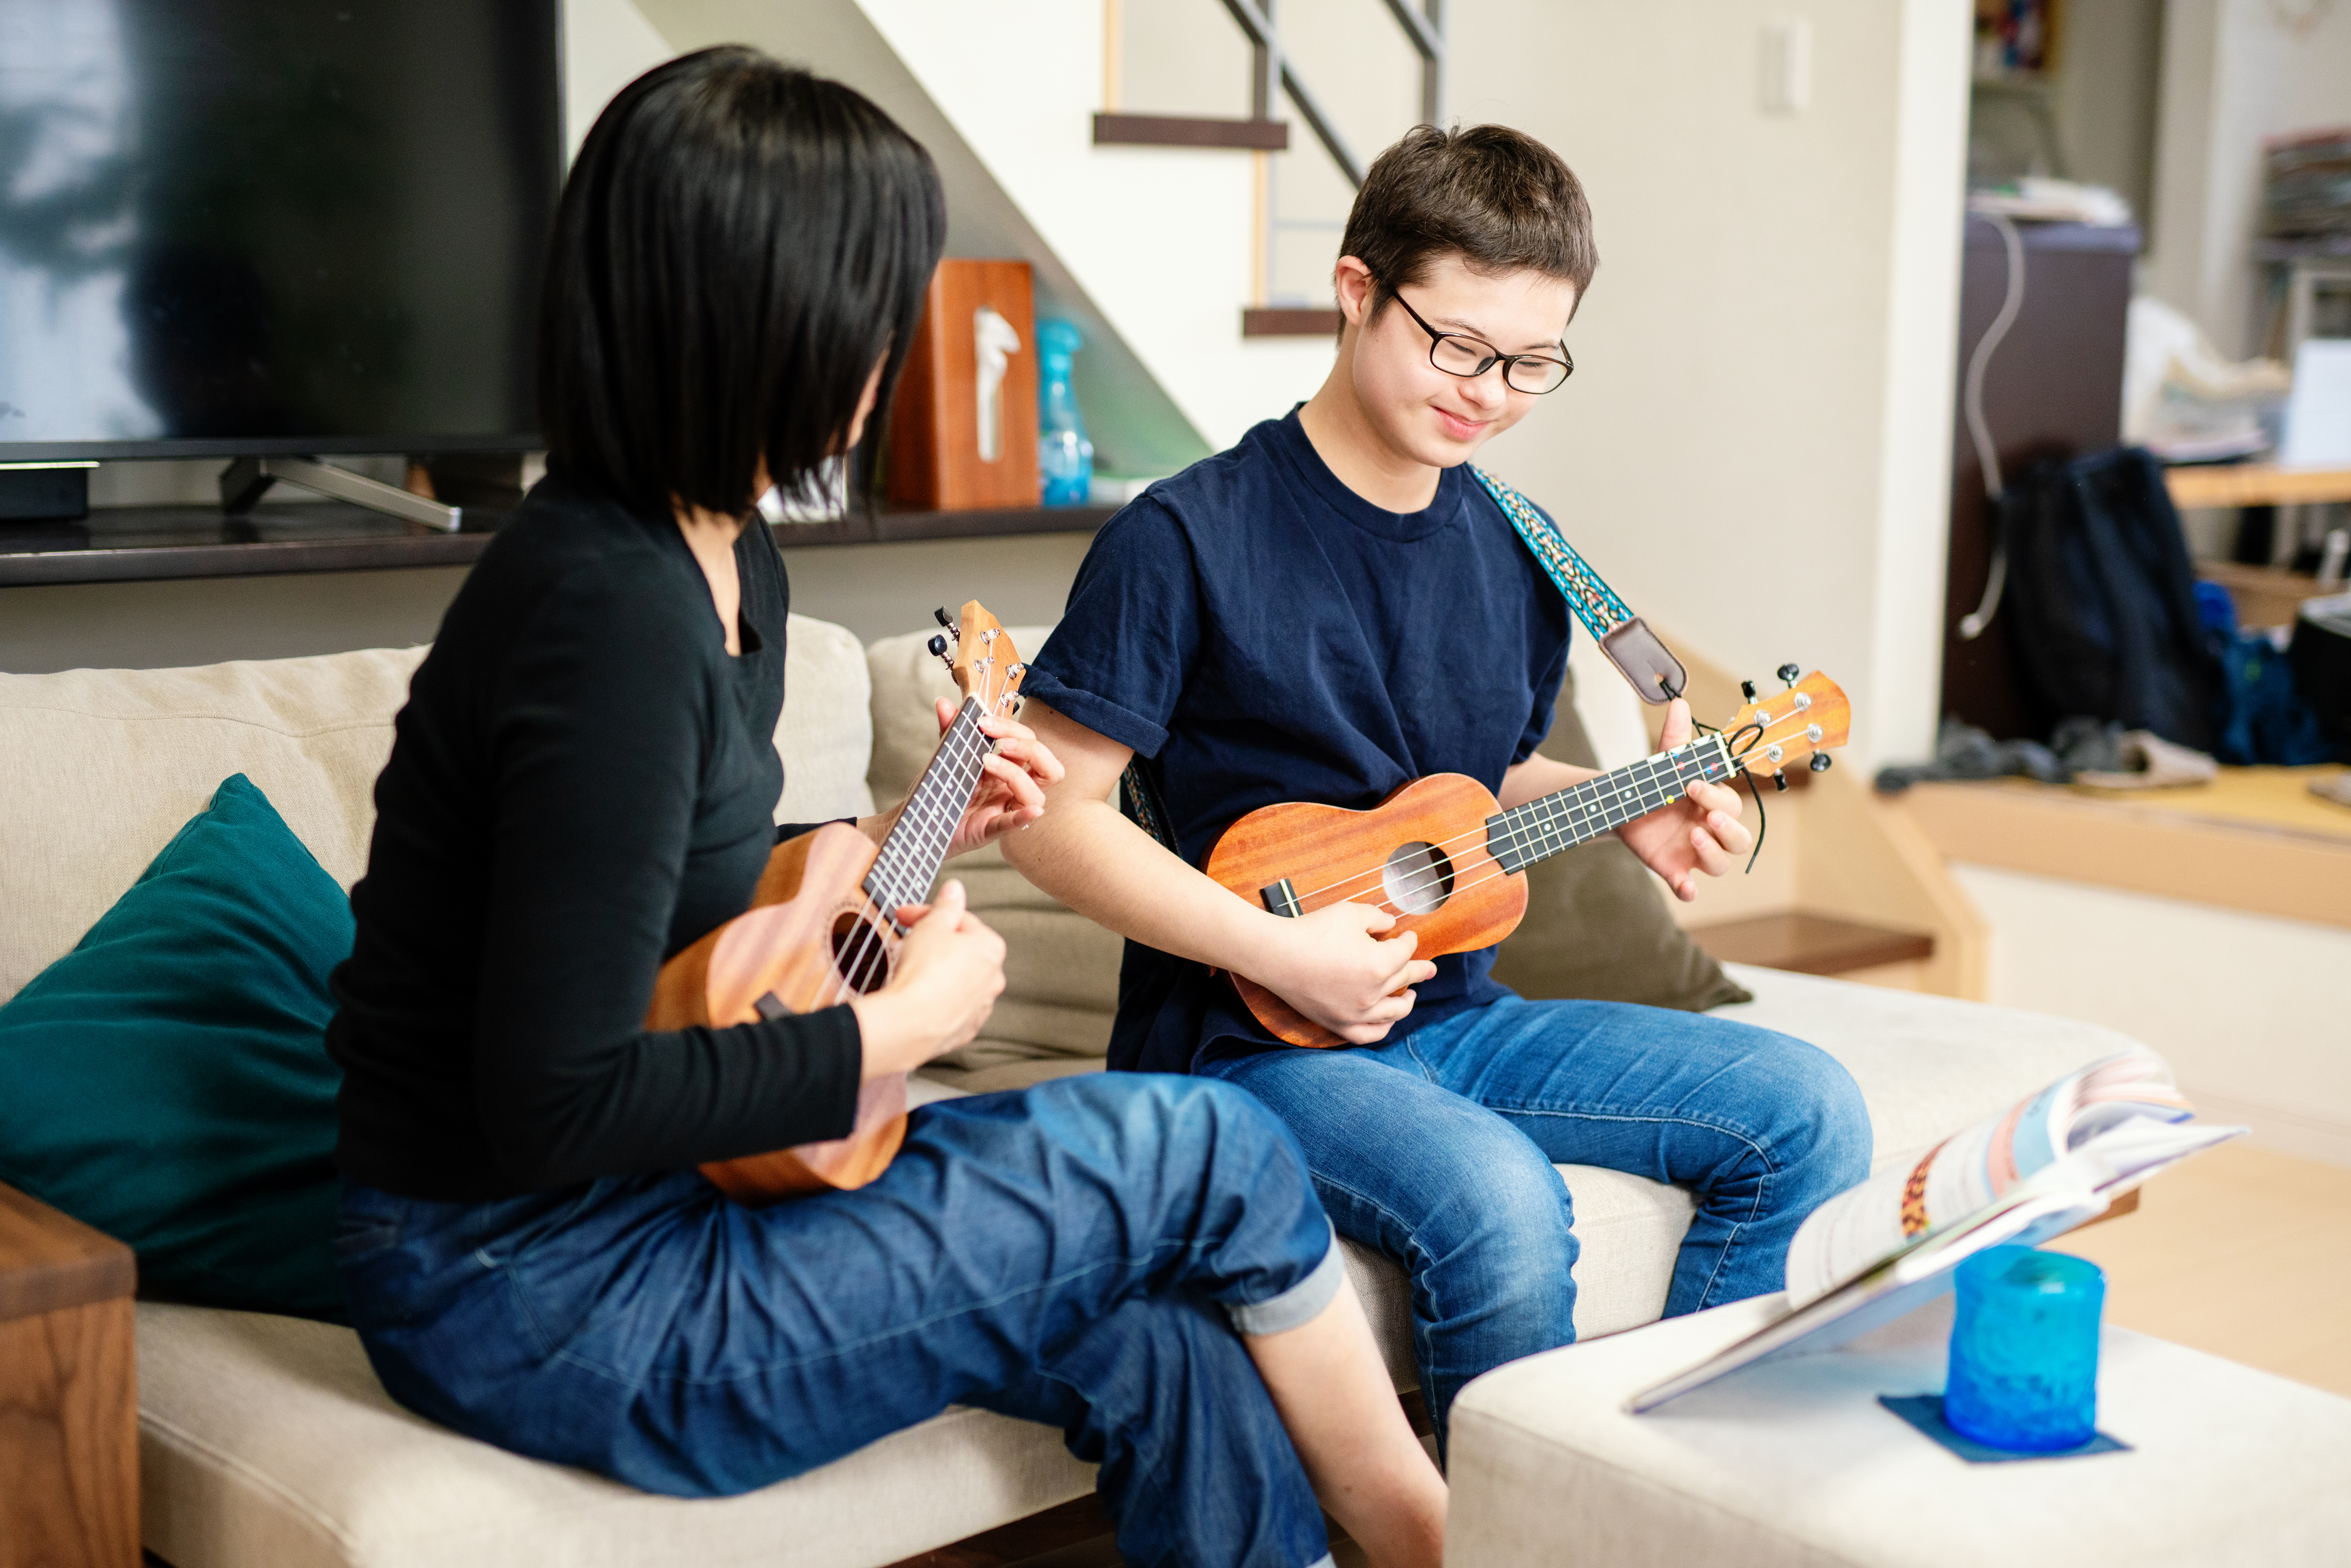 Teenage boy with Down's Syndrome practicing ukelele with his mother at home in Japan